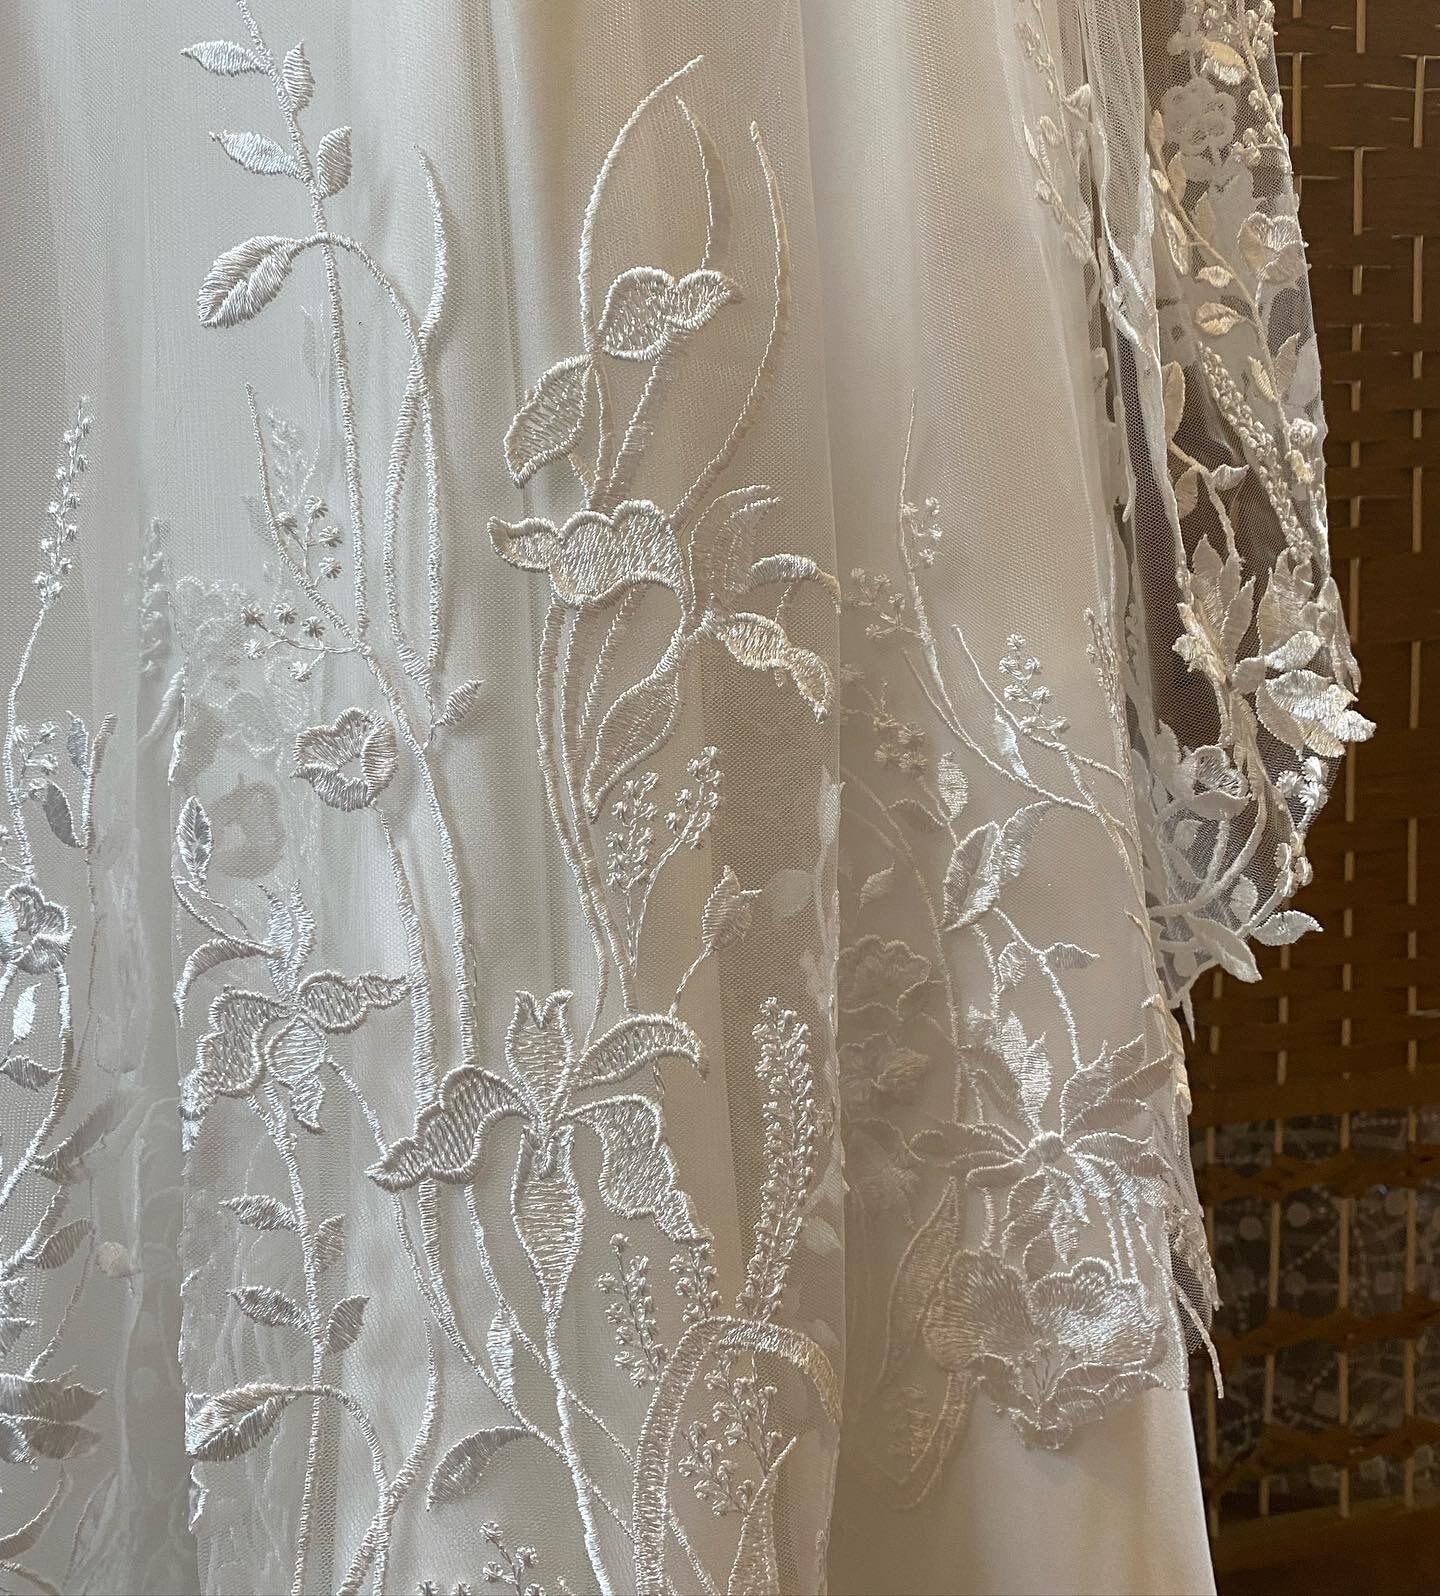 ✨ DETAILS ✨

It&rsquo;s the little details that really make your bridal look and our beautiful Frangipani veil has them in spades
&bull;
Delicately embroidered wildflowers edge this ethereal veil giving it a real whimsical, yet timeless feel. Whether